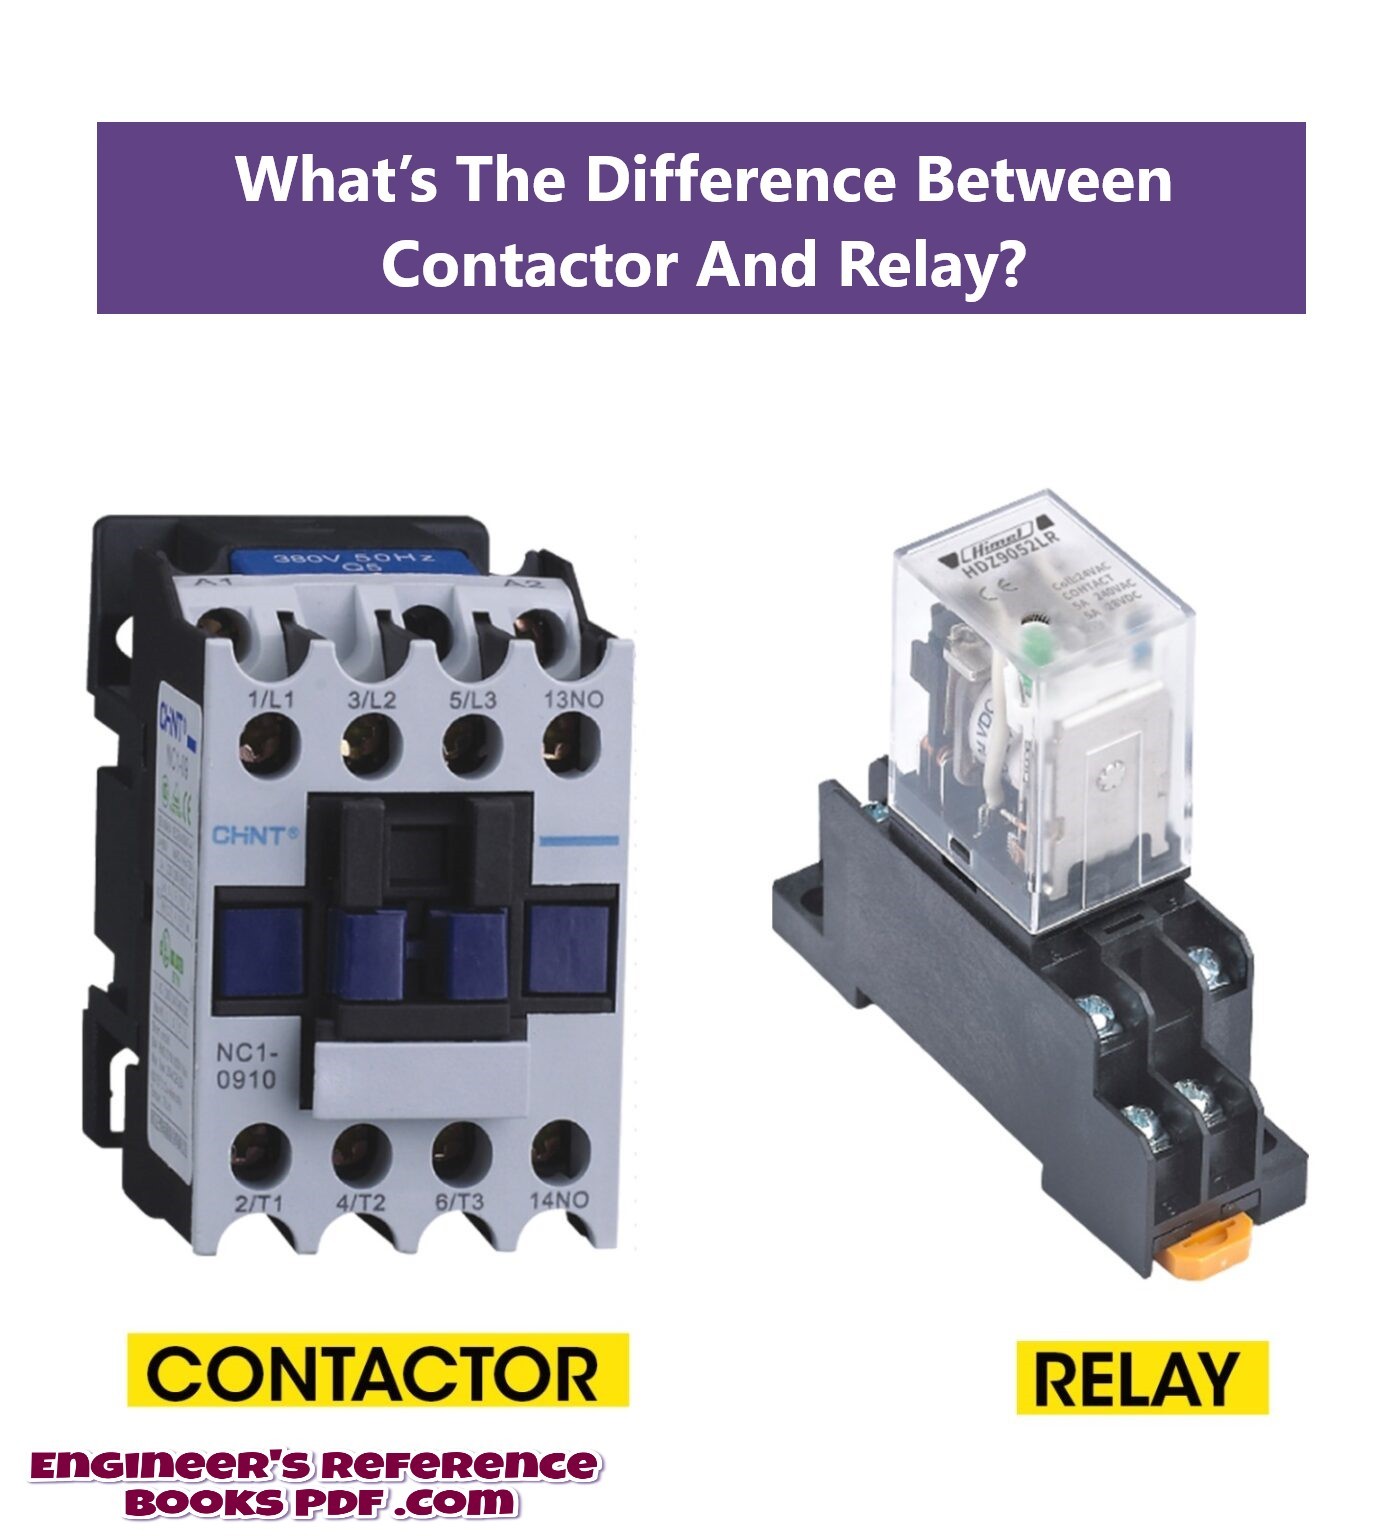 What’s The Difference Between Contactor And Relay?